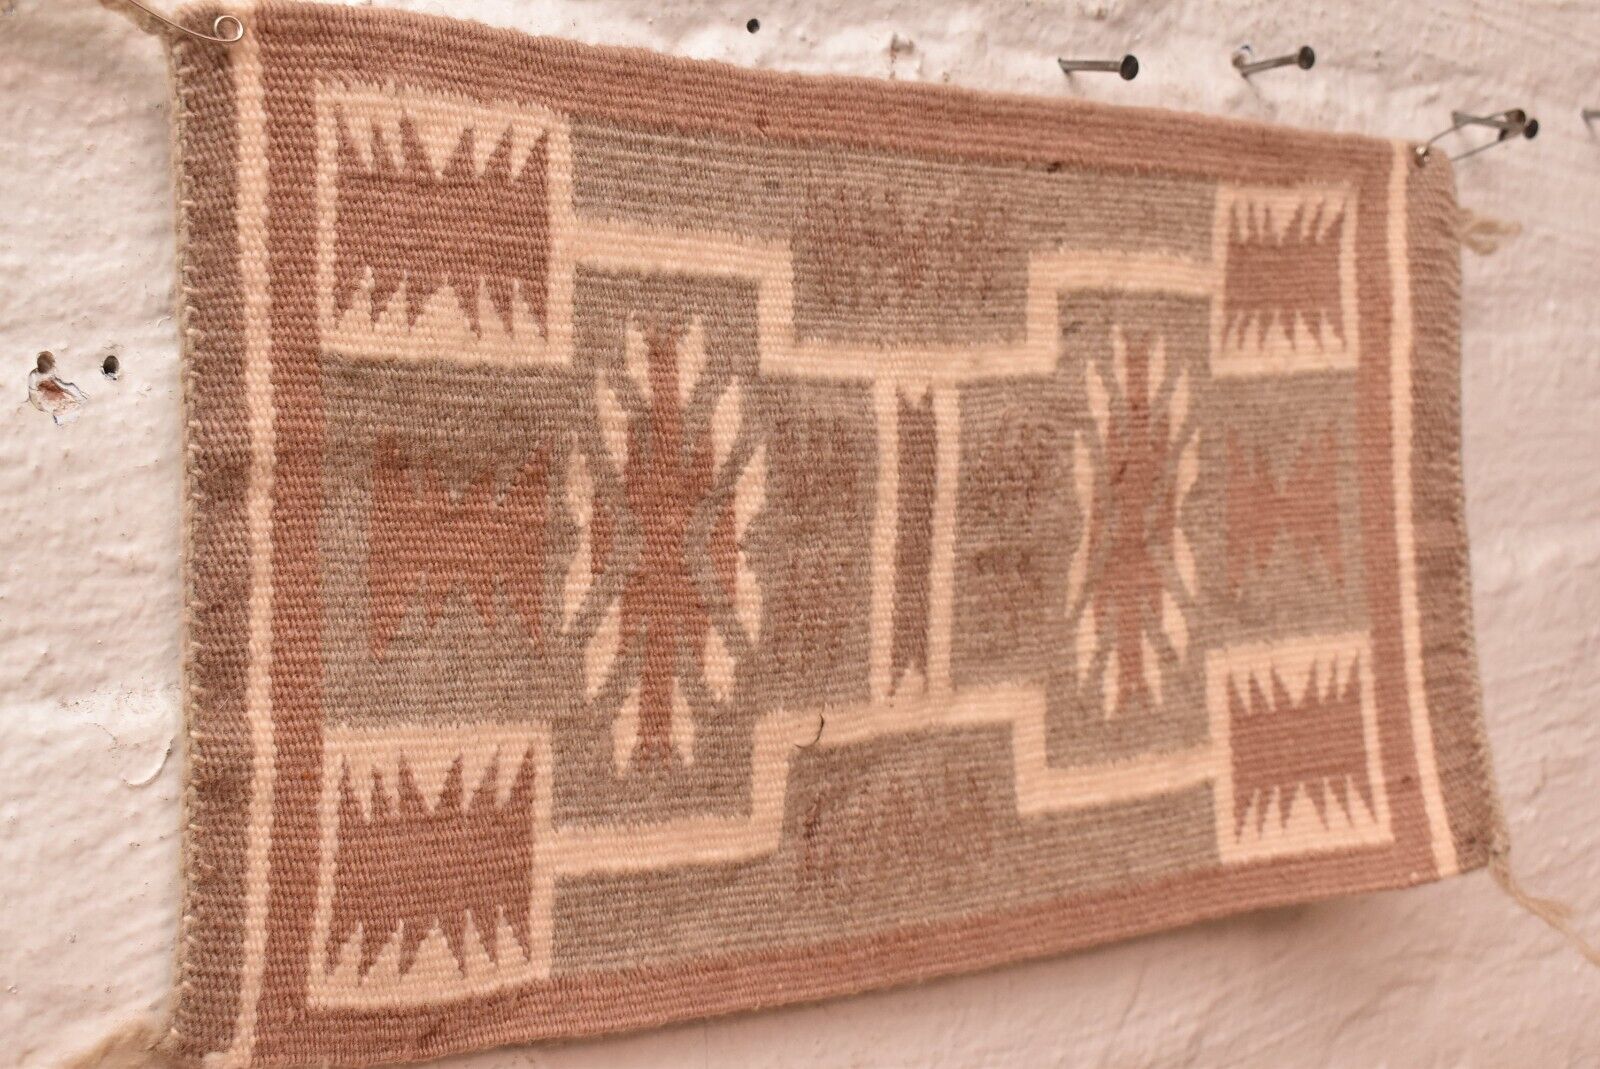 Antique Navajo Rug Textile Native American Indian 14x9 Small STORM PATTERN VTG